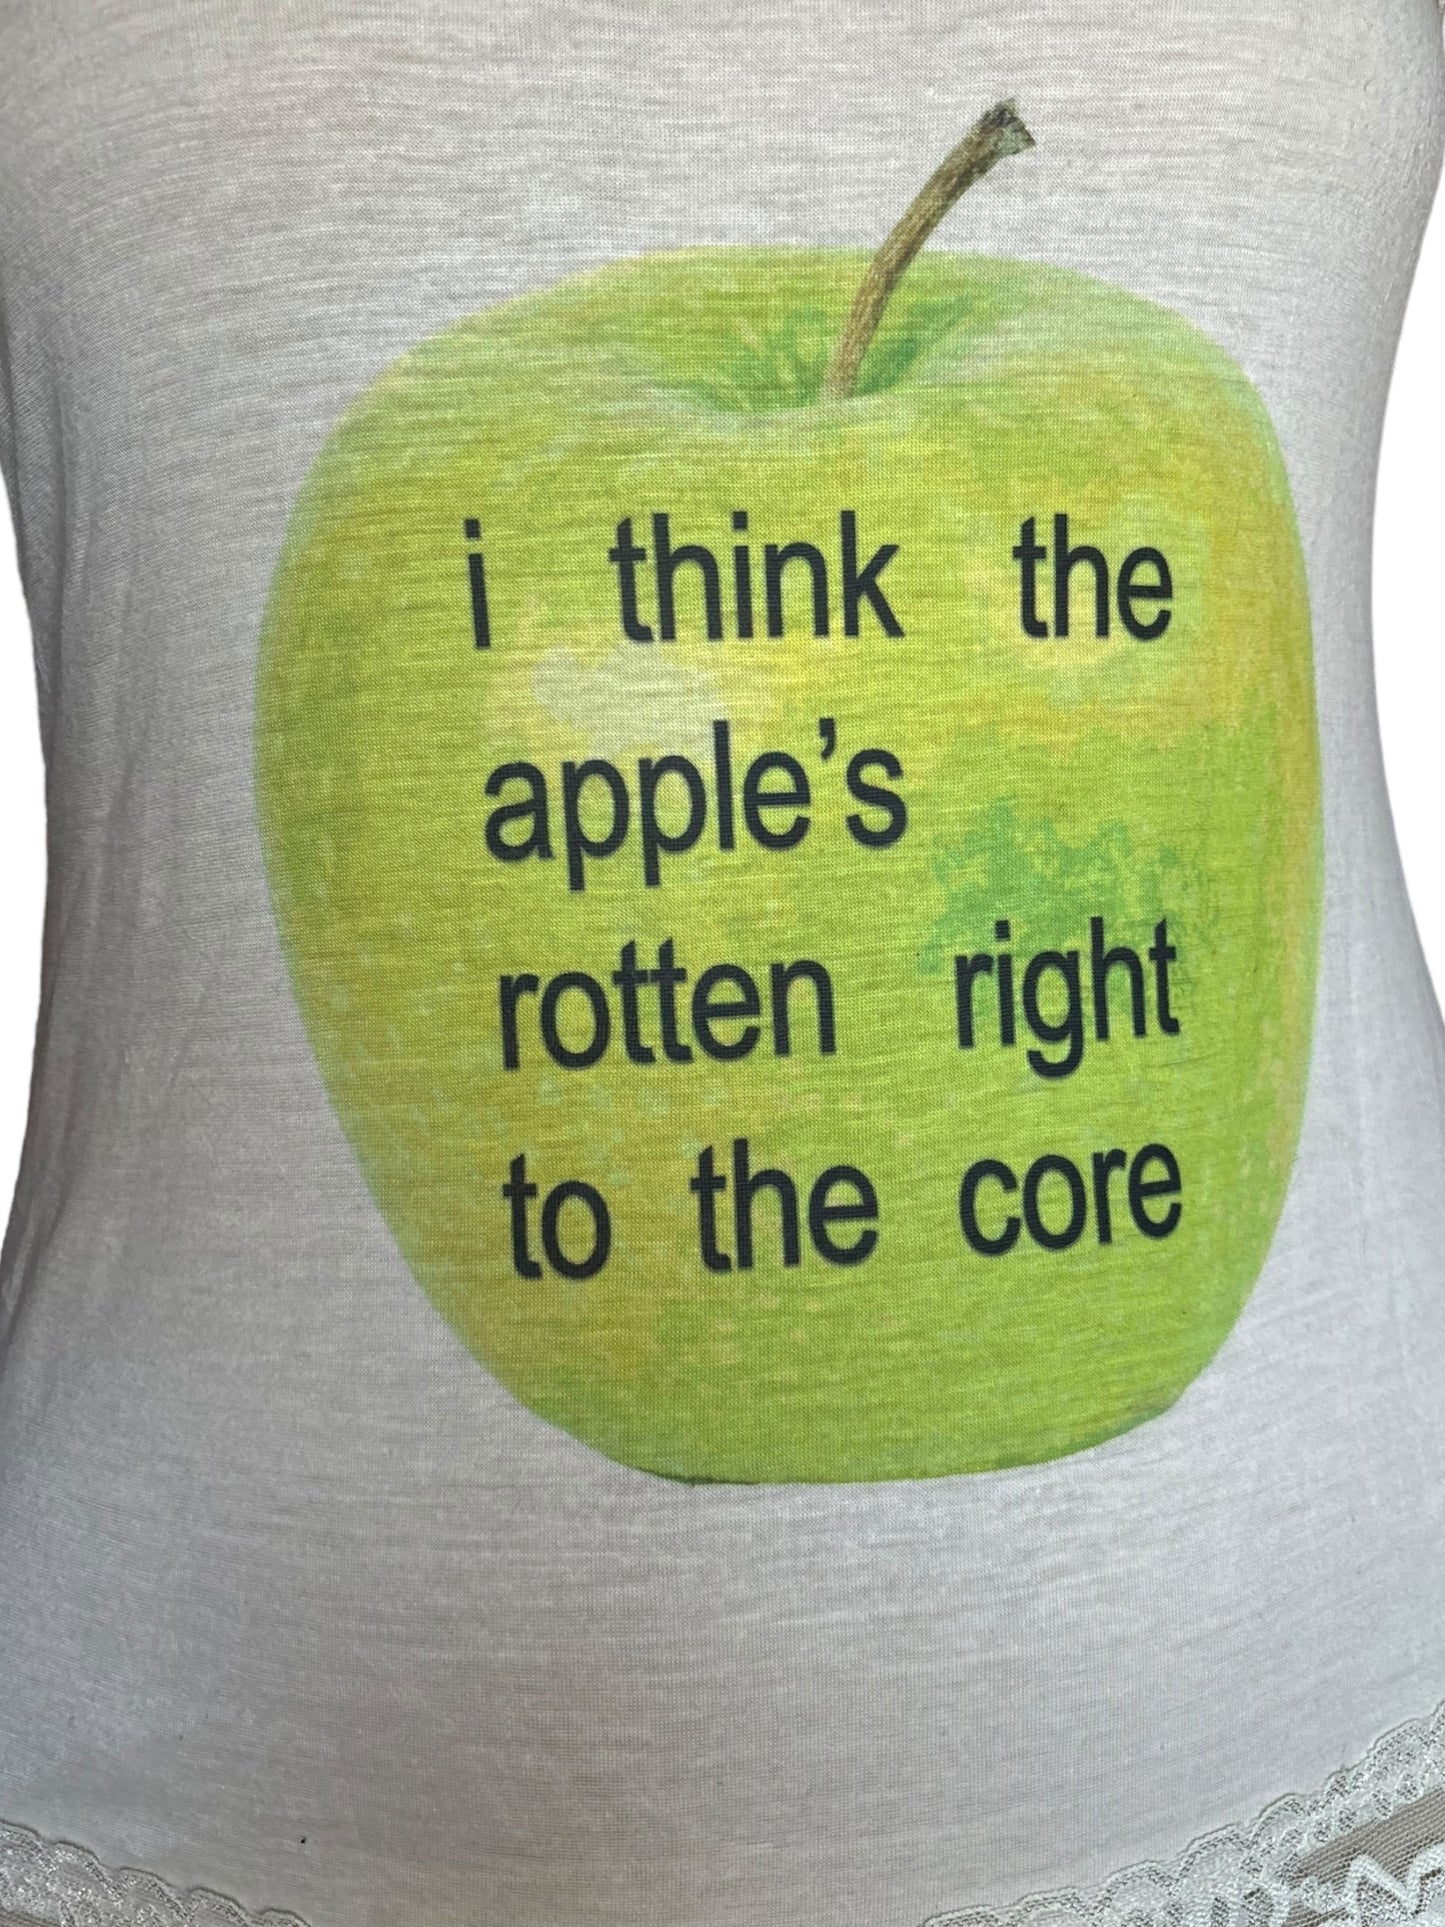 Rotten Apple Stretchy Top Tank - S